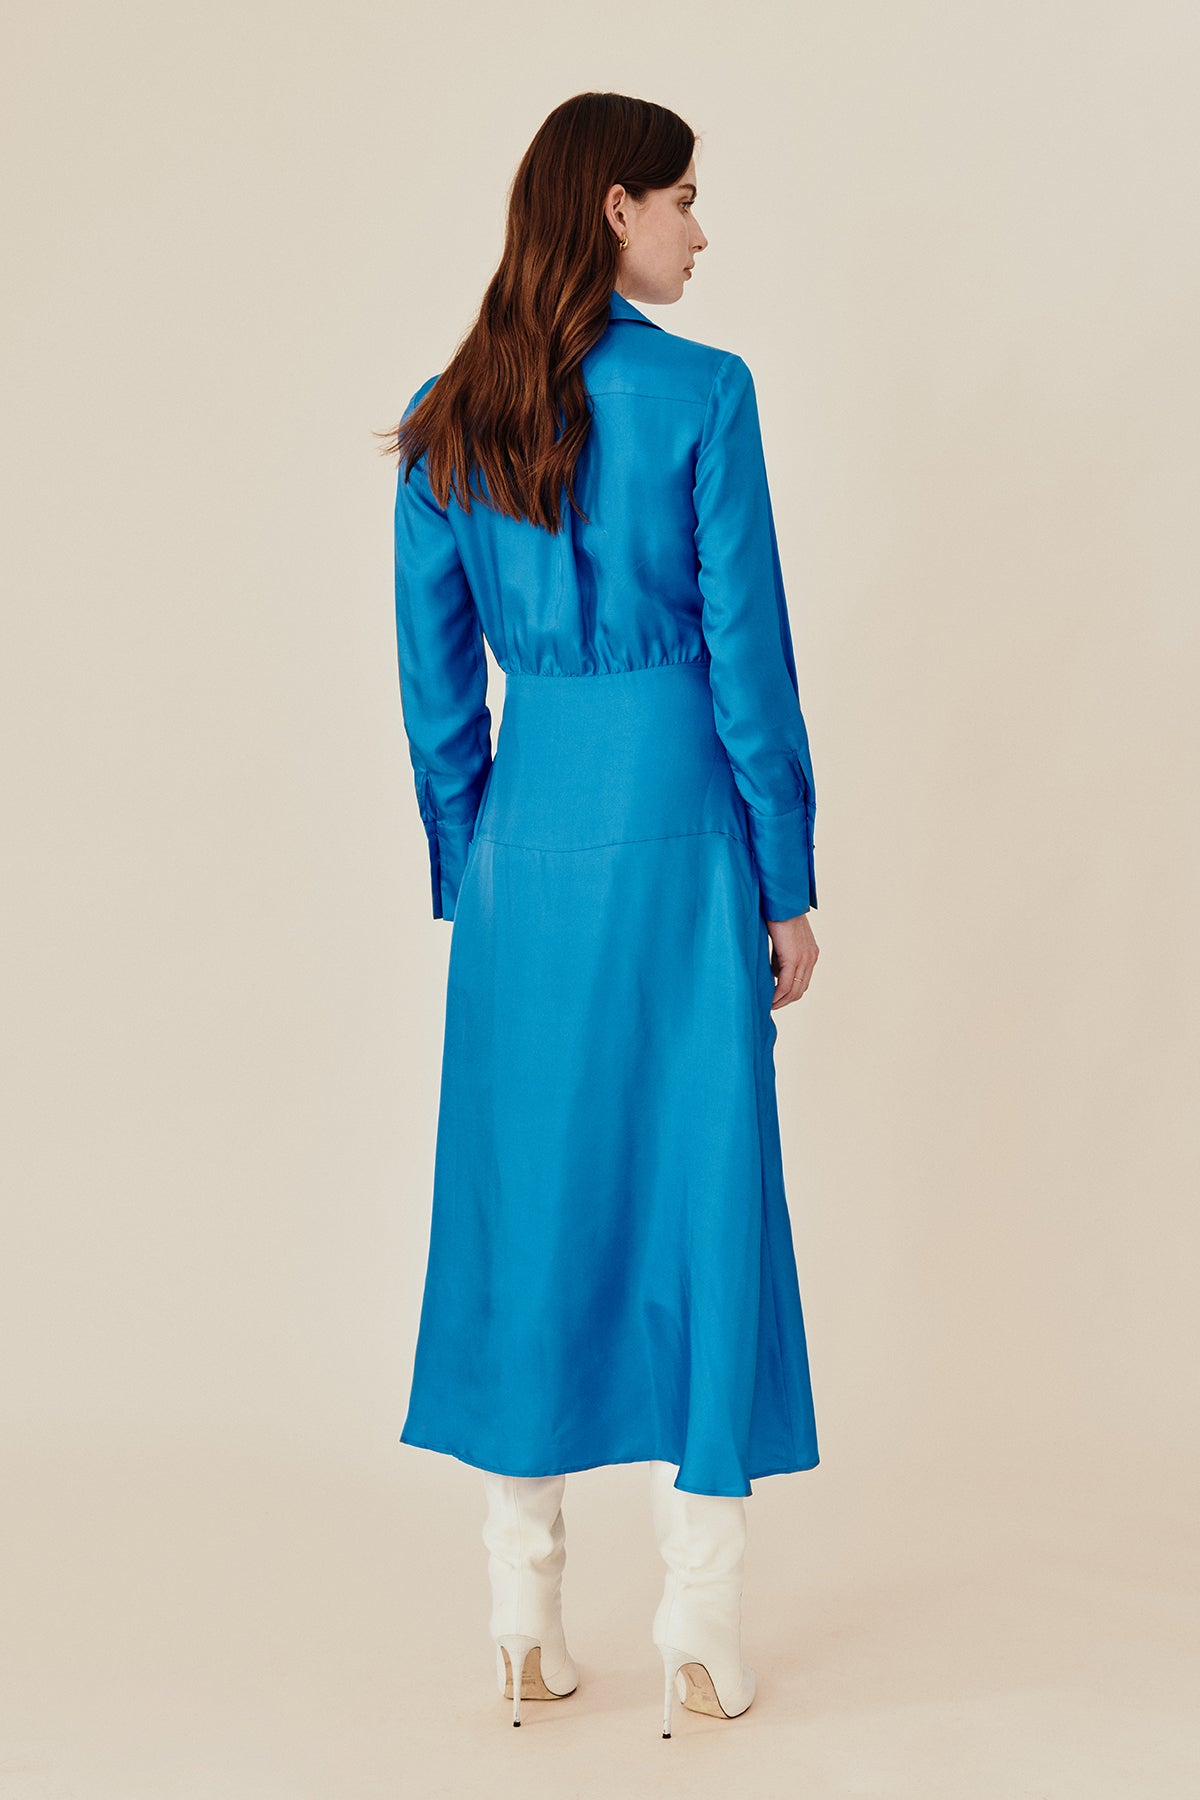 back view of Model wearing Australian fashion designer GINGER & SMARTS' blue silk Libertine that is the classic wrap silhouette that features a sharp collar and gently flared skirt with a long shirt sleeve.  